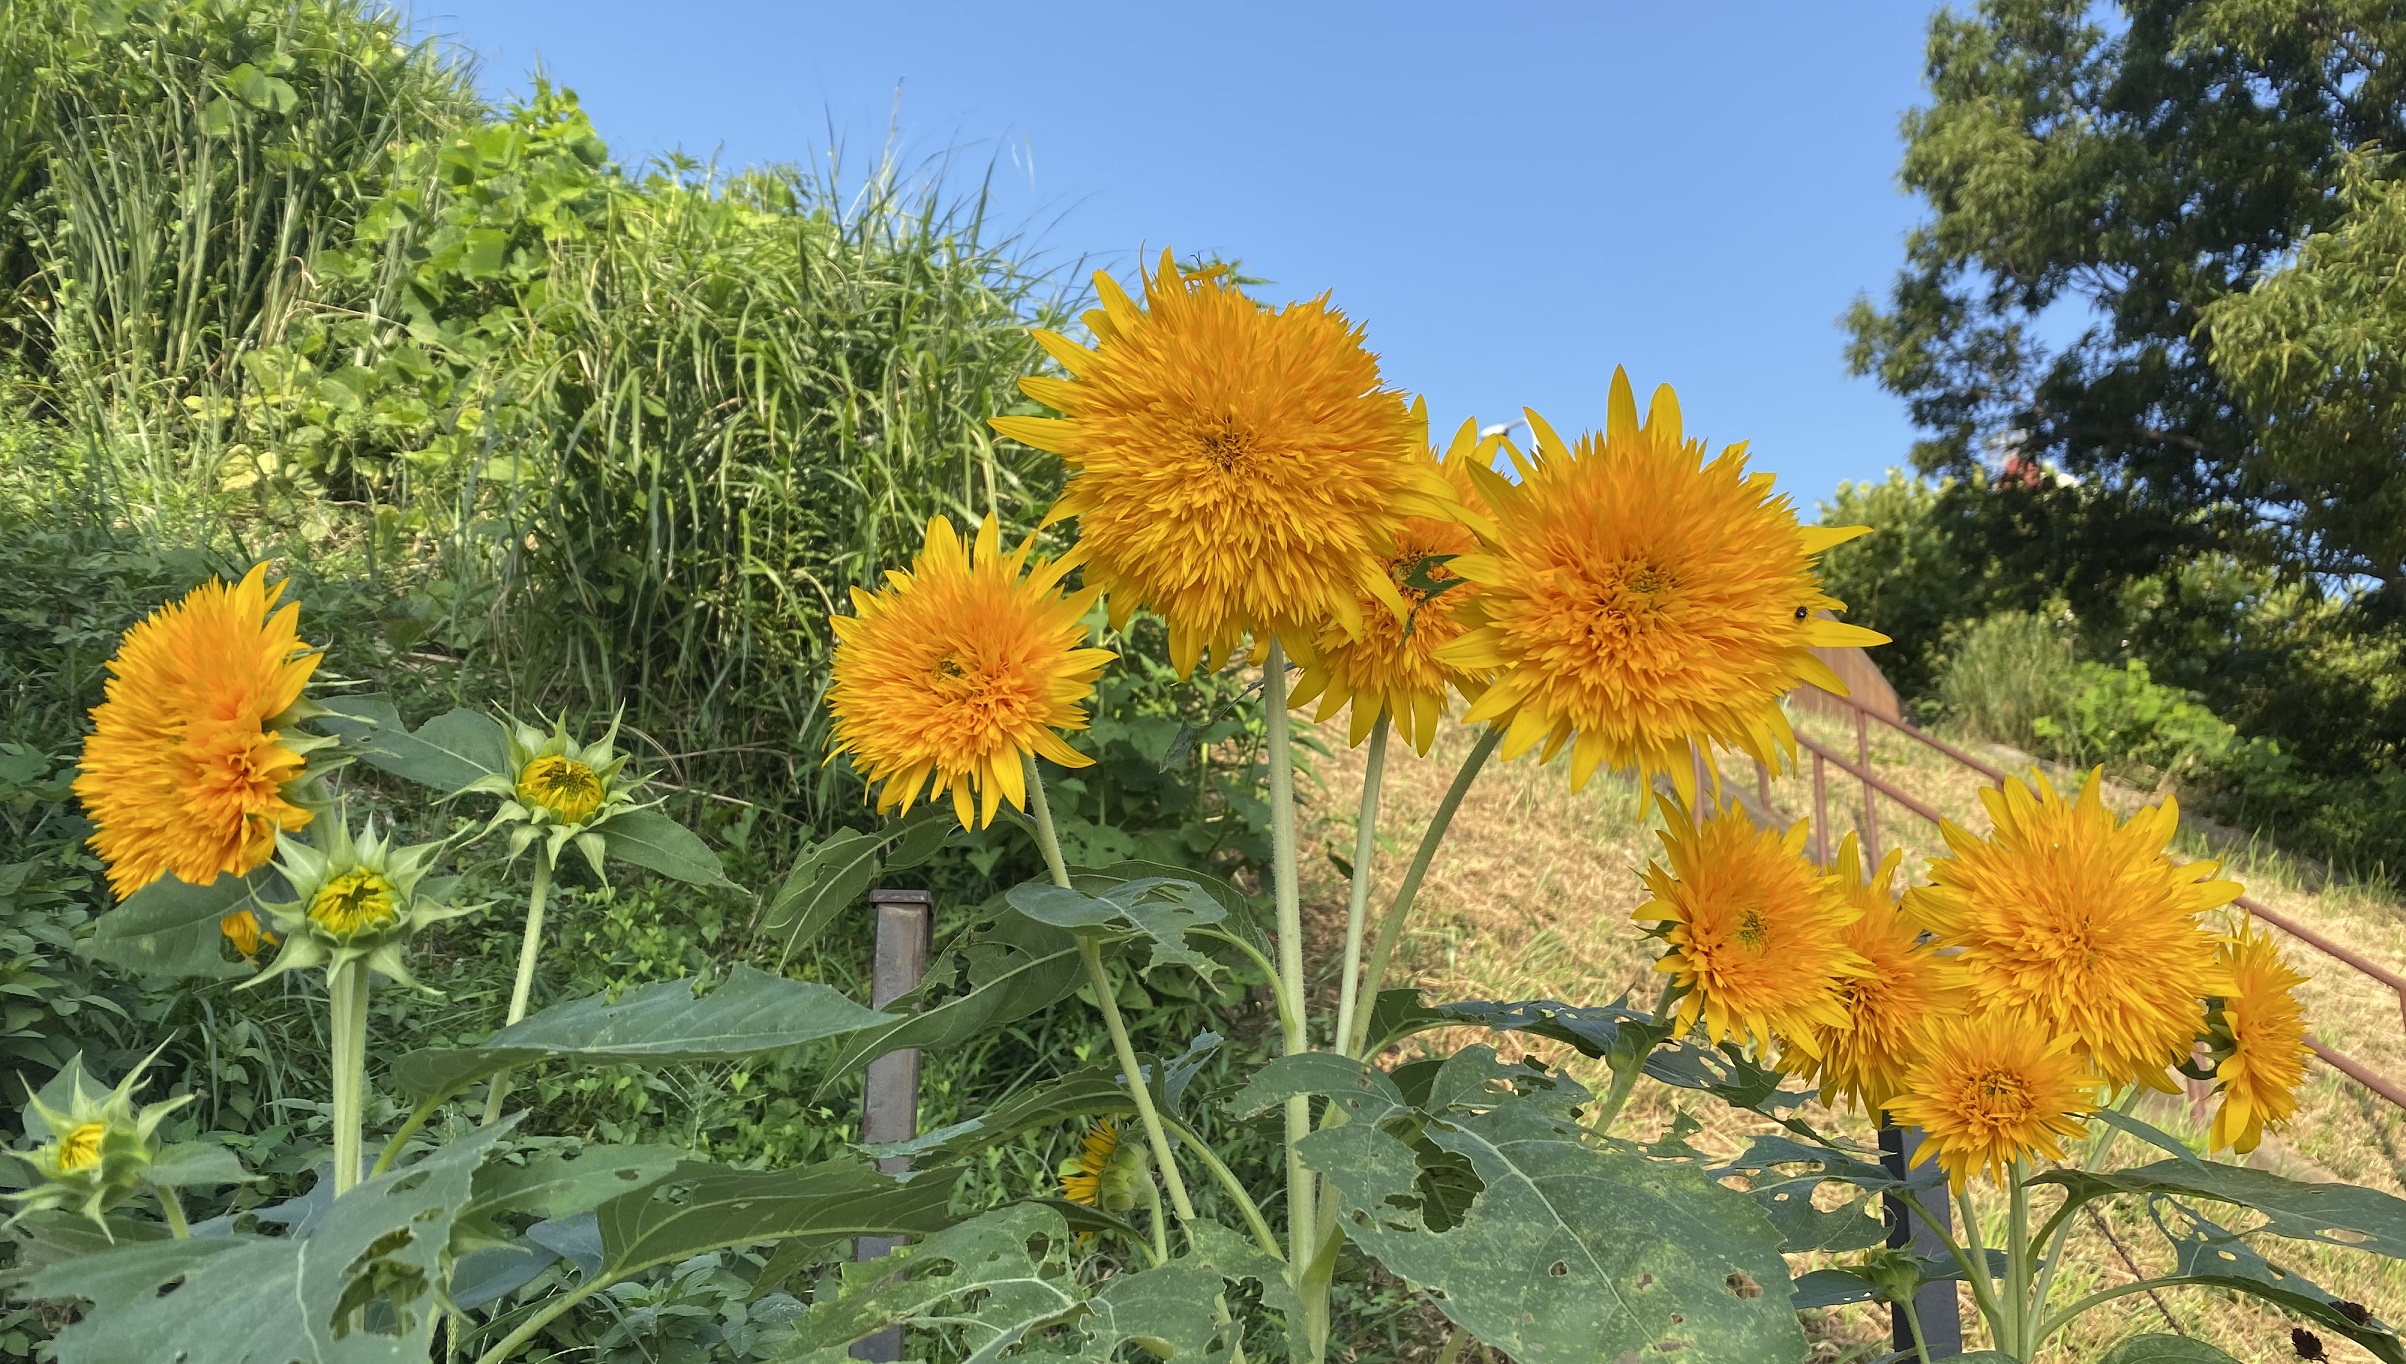 Tohoku Double Flowered Sunflower Cultivation Report 育ててみました